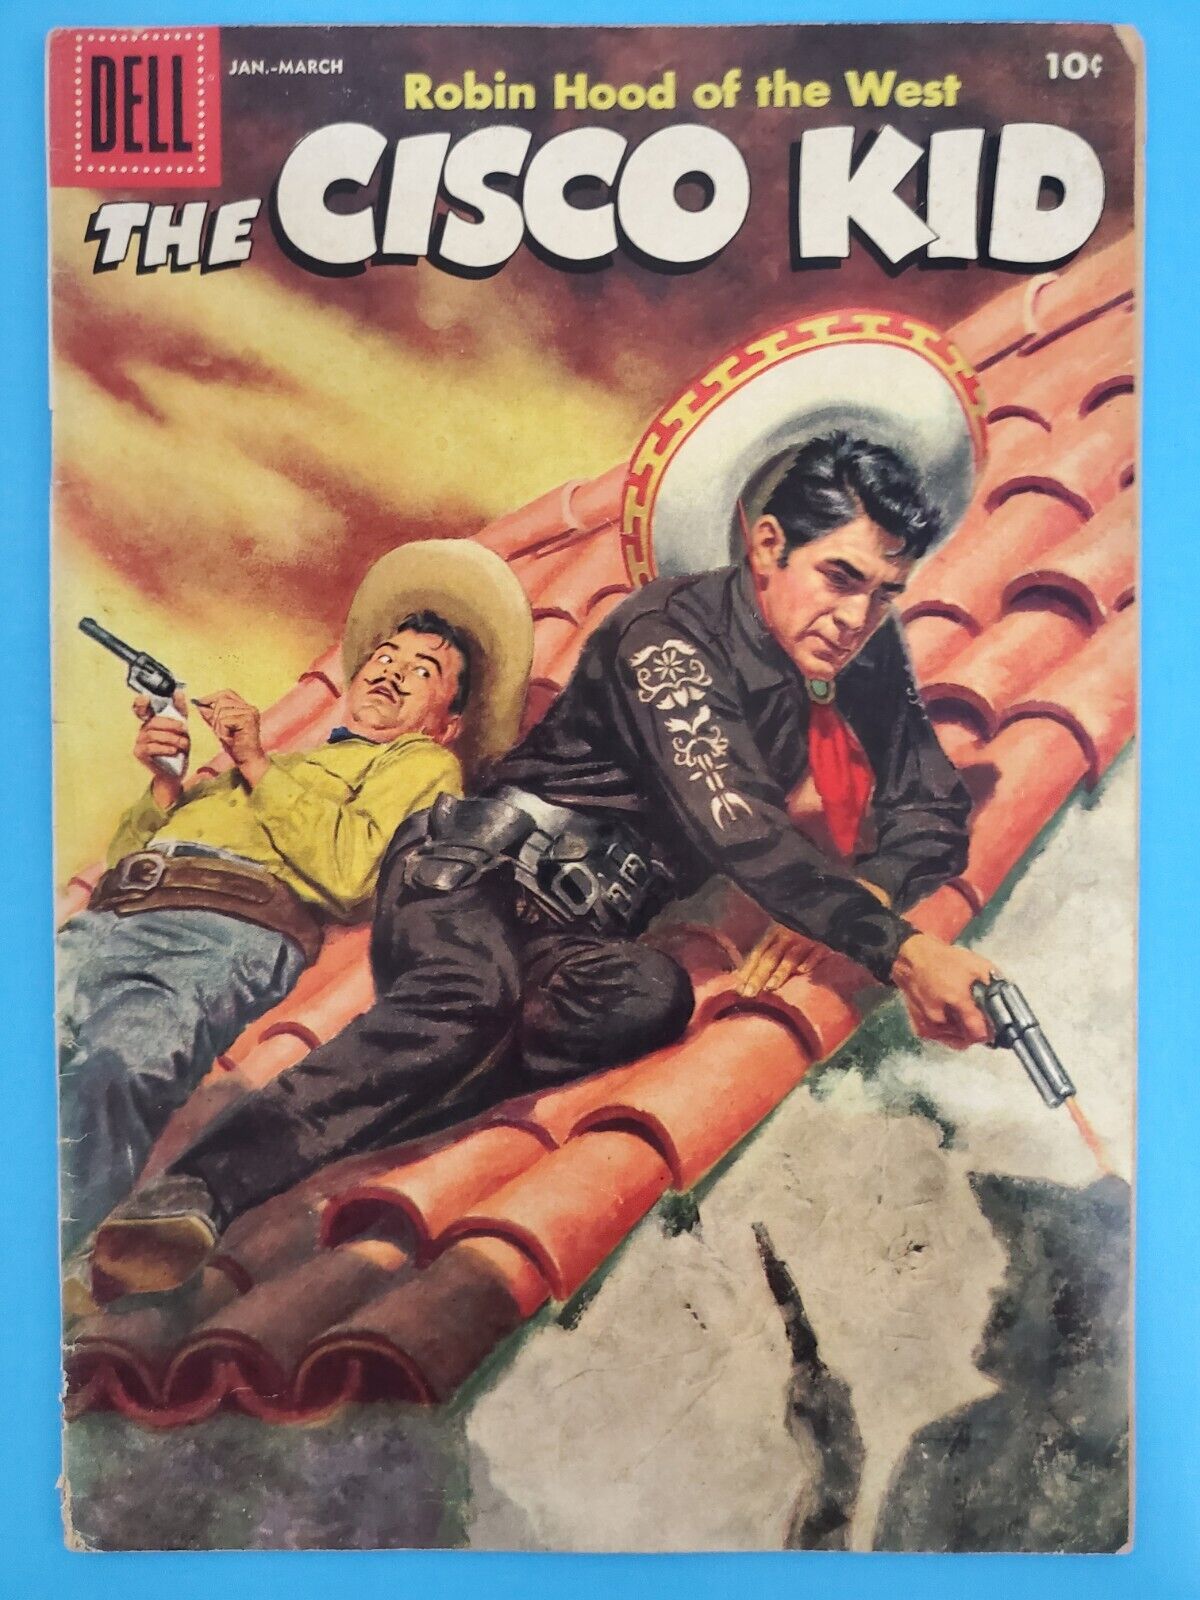 ROBIN HOOD OF THE WEST THE CISCO KID JAN-MARCH 10 cent DELL COMICS SILVER AGE